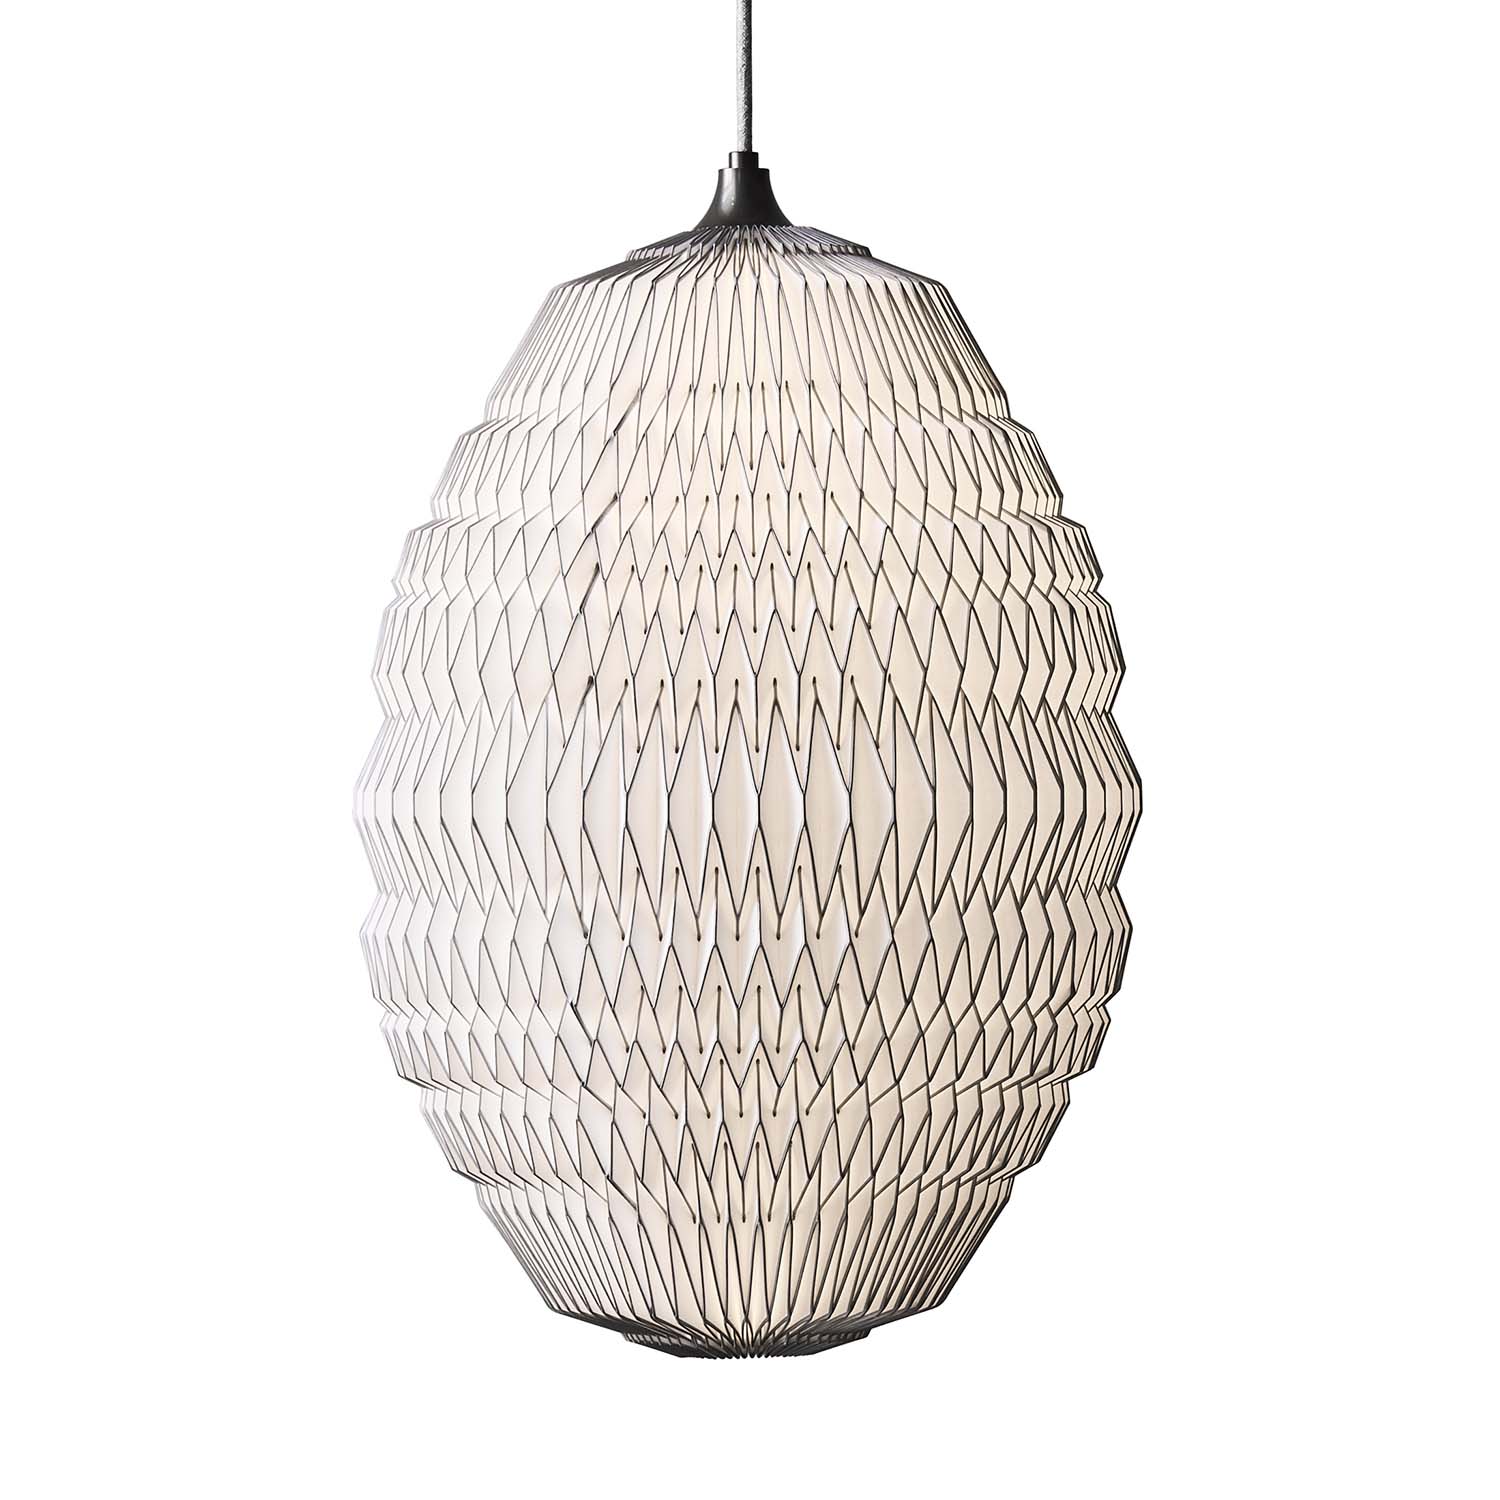 CALEO 2 - Handcrafted pleated paper pendant light